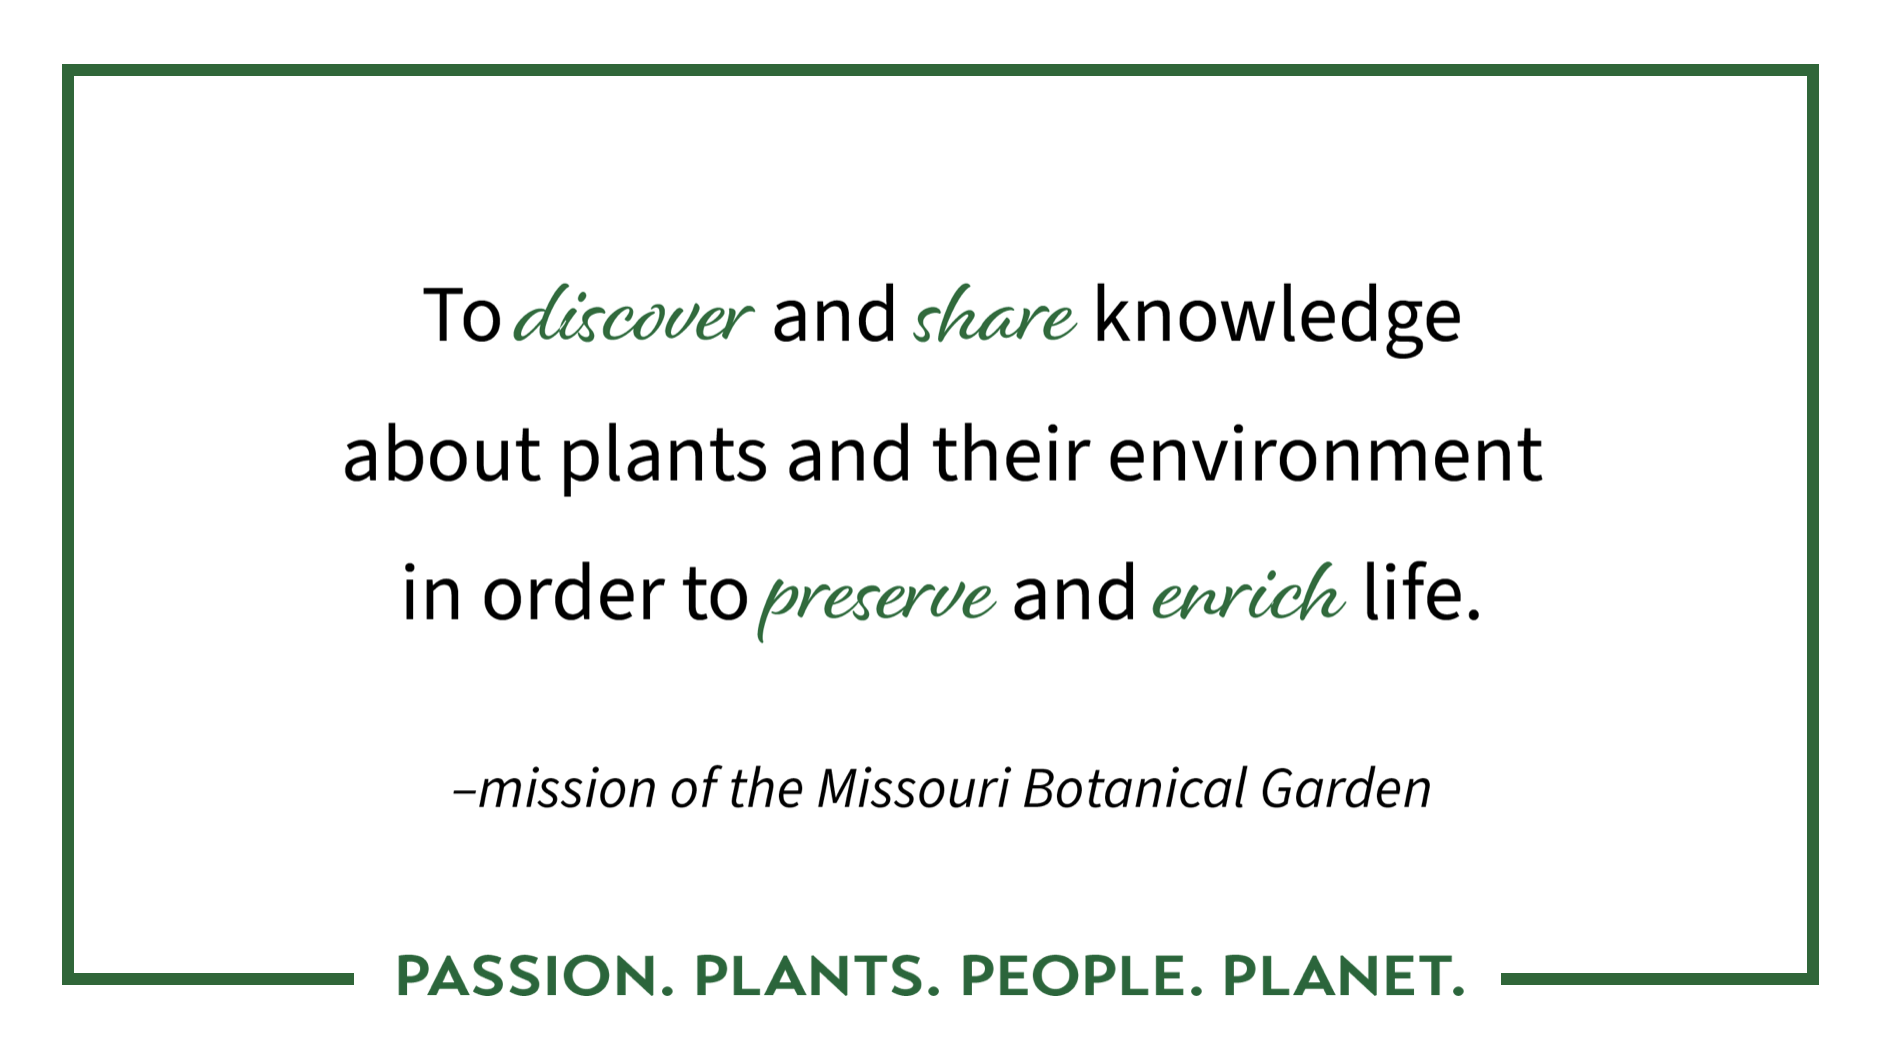 To discover and share knowledge about plants and their environment in order to preserve and enrich life -Mission of the Missouri Botanical Garden | Passion. Plants. People. Planet.